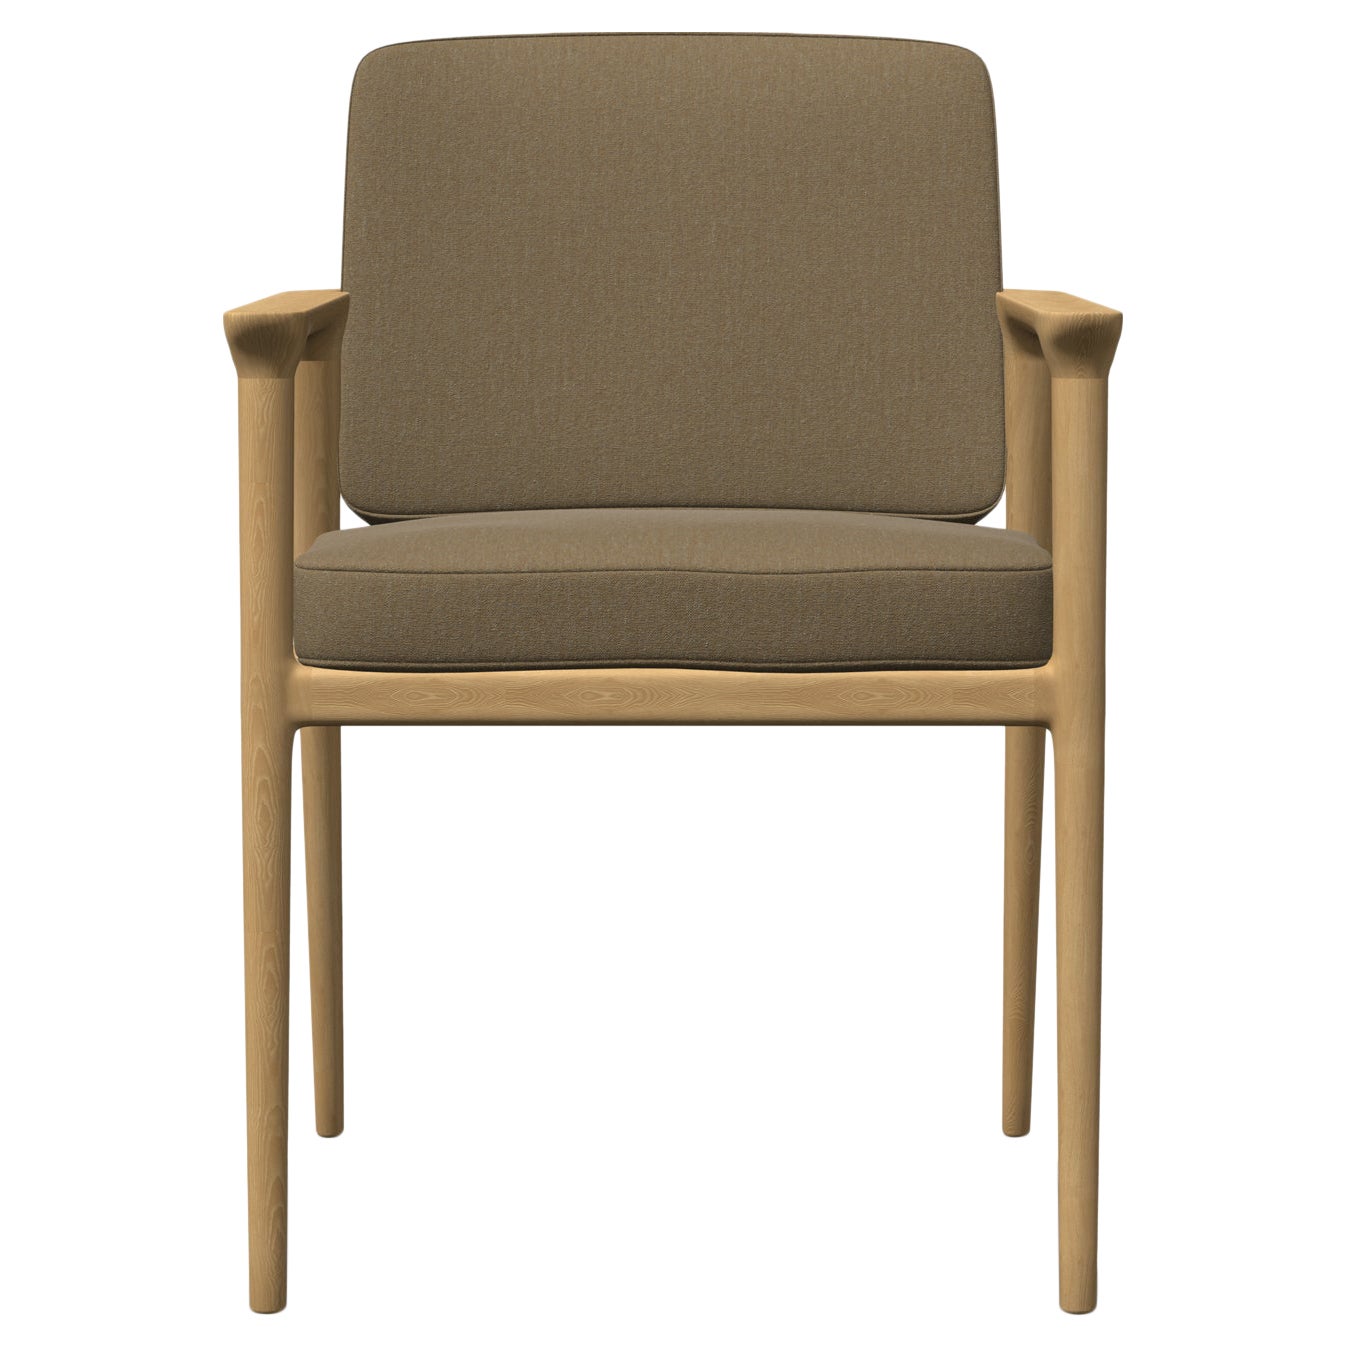 Moooi Zio Dining Chair in Justo, Bred Upholstery with Oak Natural Oil Frame For Sale